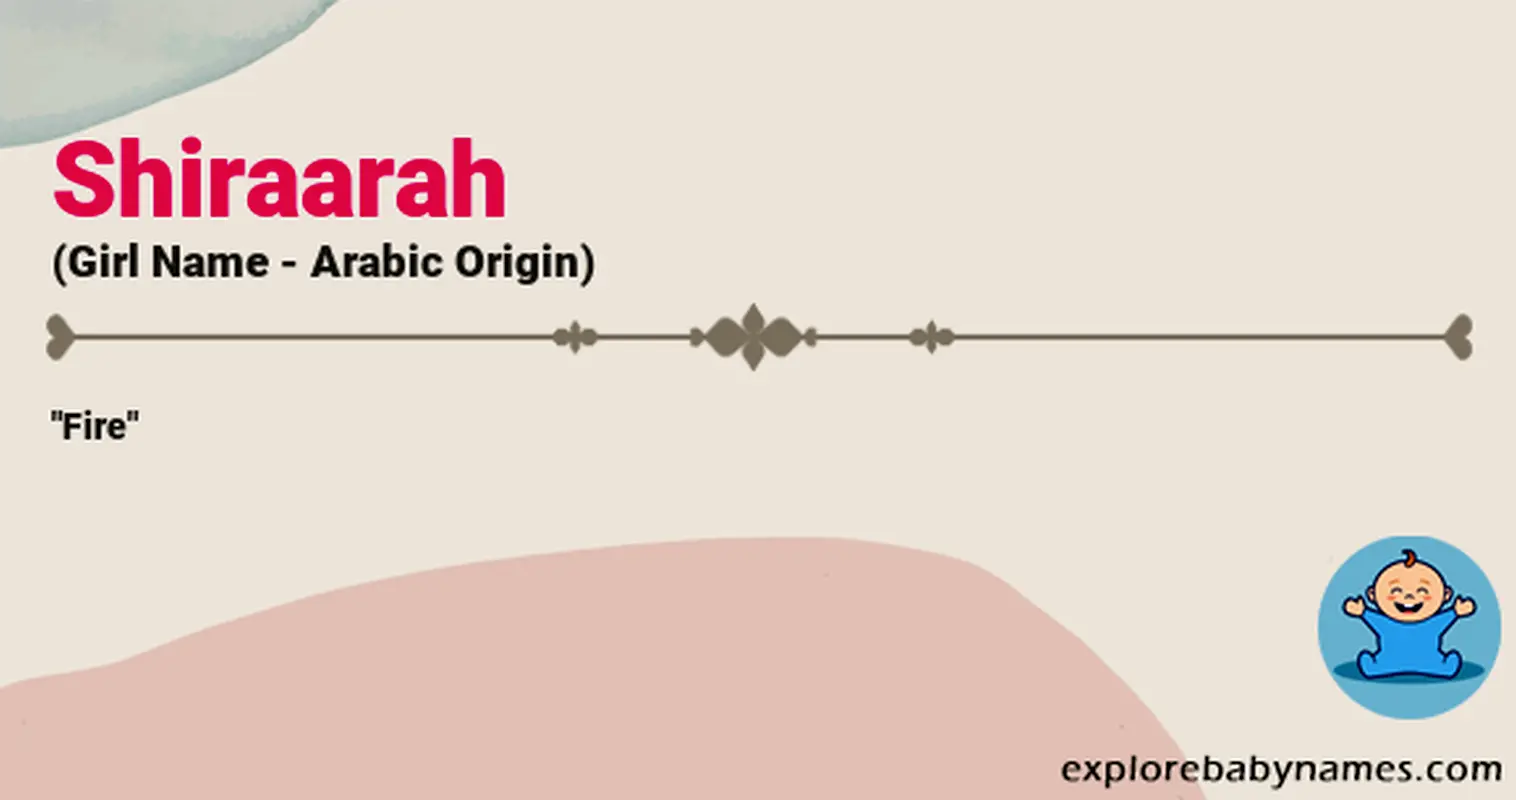 Meaning of Shiraarah